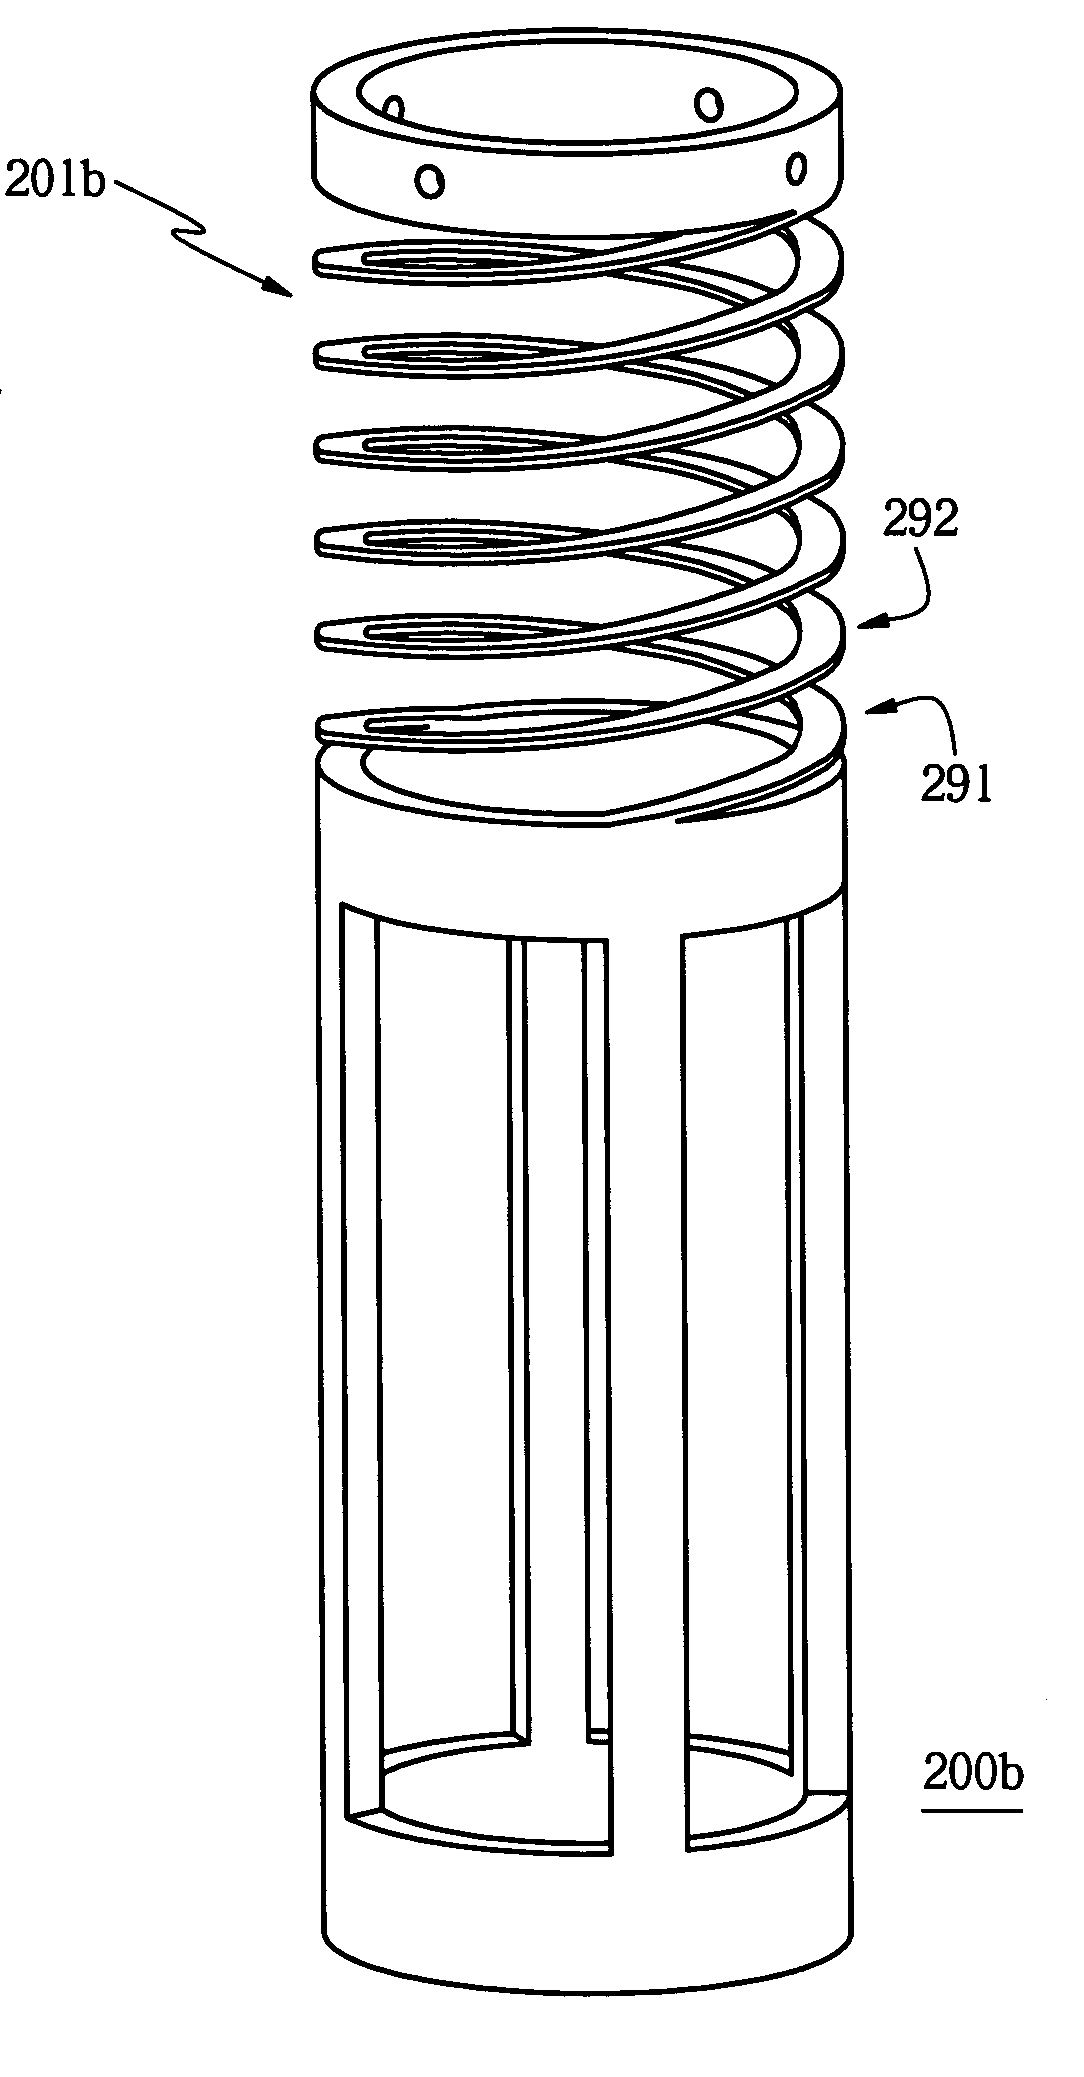 Tubular compliant mechanisms for ultrasonic imaging systems and intravascular interventional devices